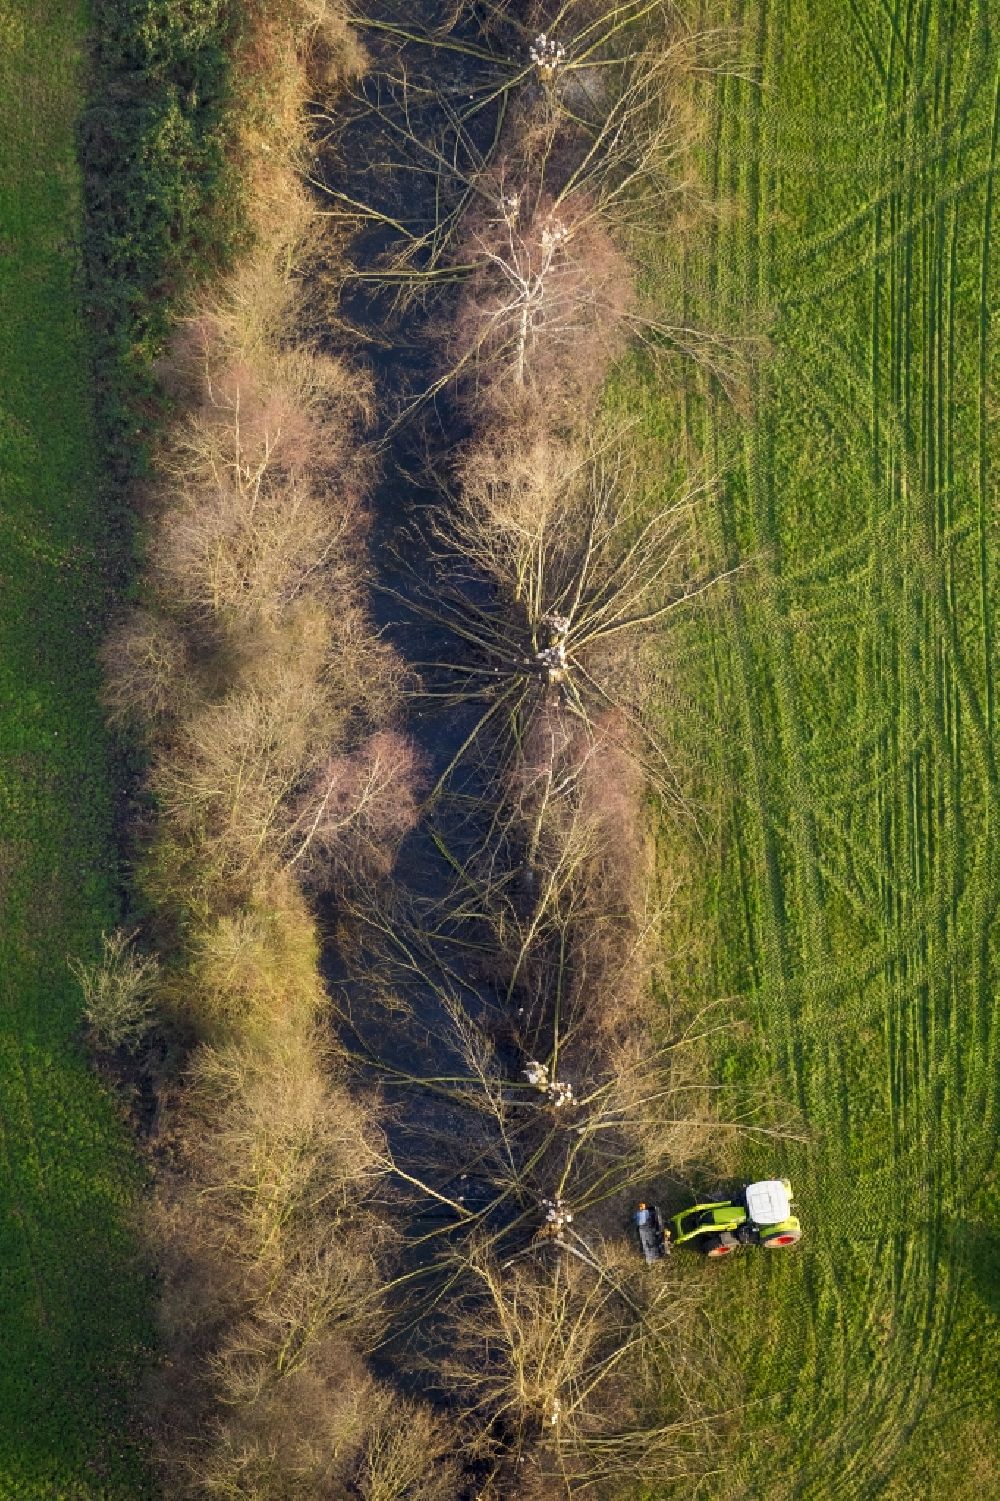 Hamm from the bird's eye view: Winter pruning of a pollard willow in the Ahseauen on the outskirts of Hamm in North Rhine-Westphalia